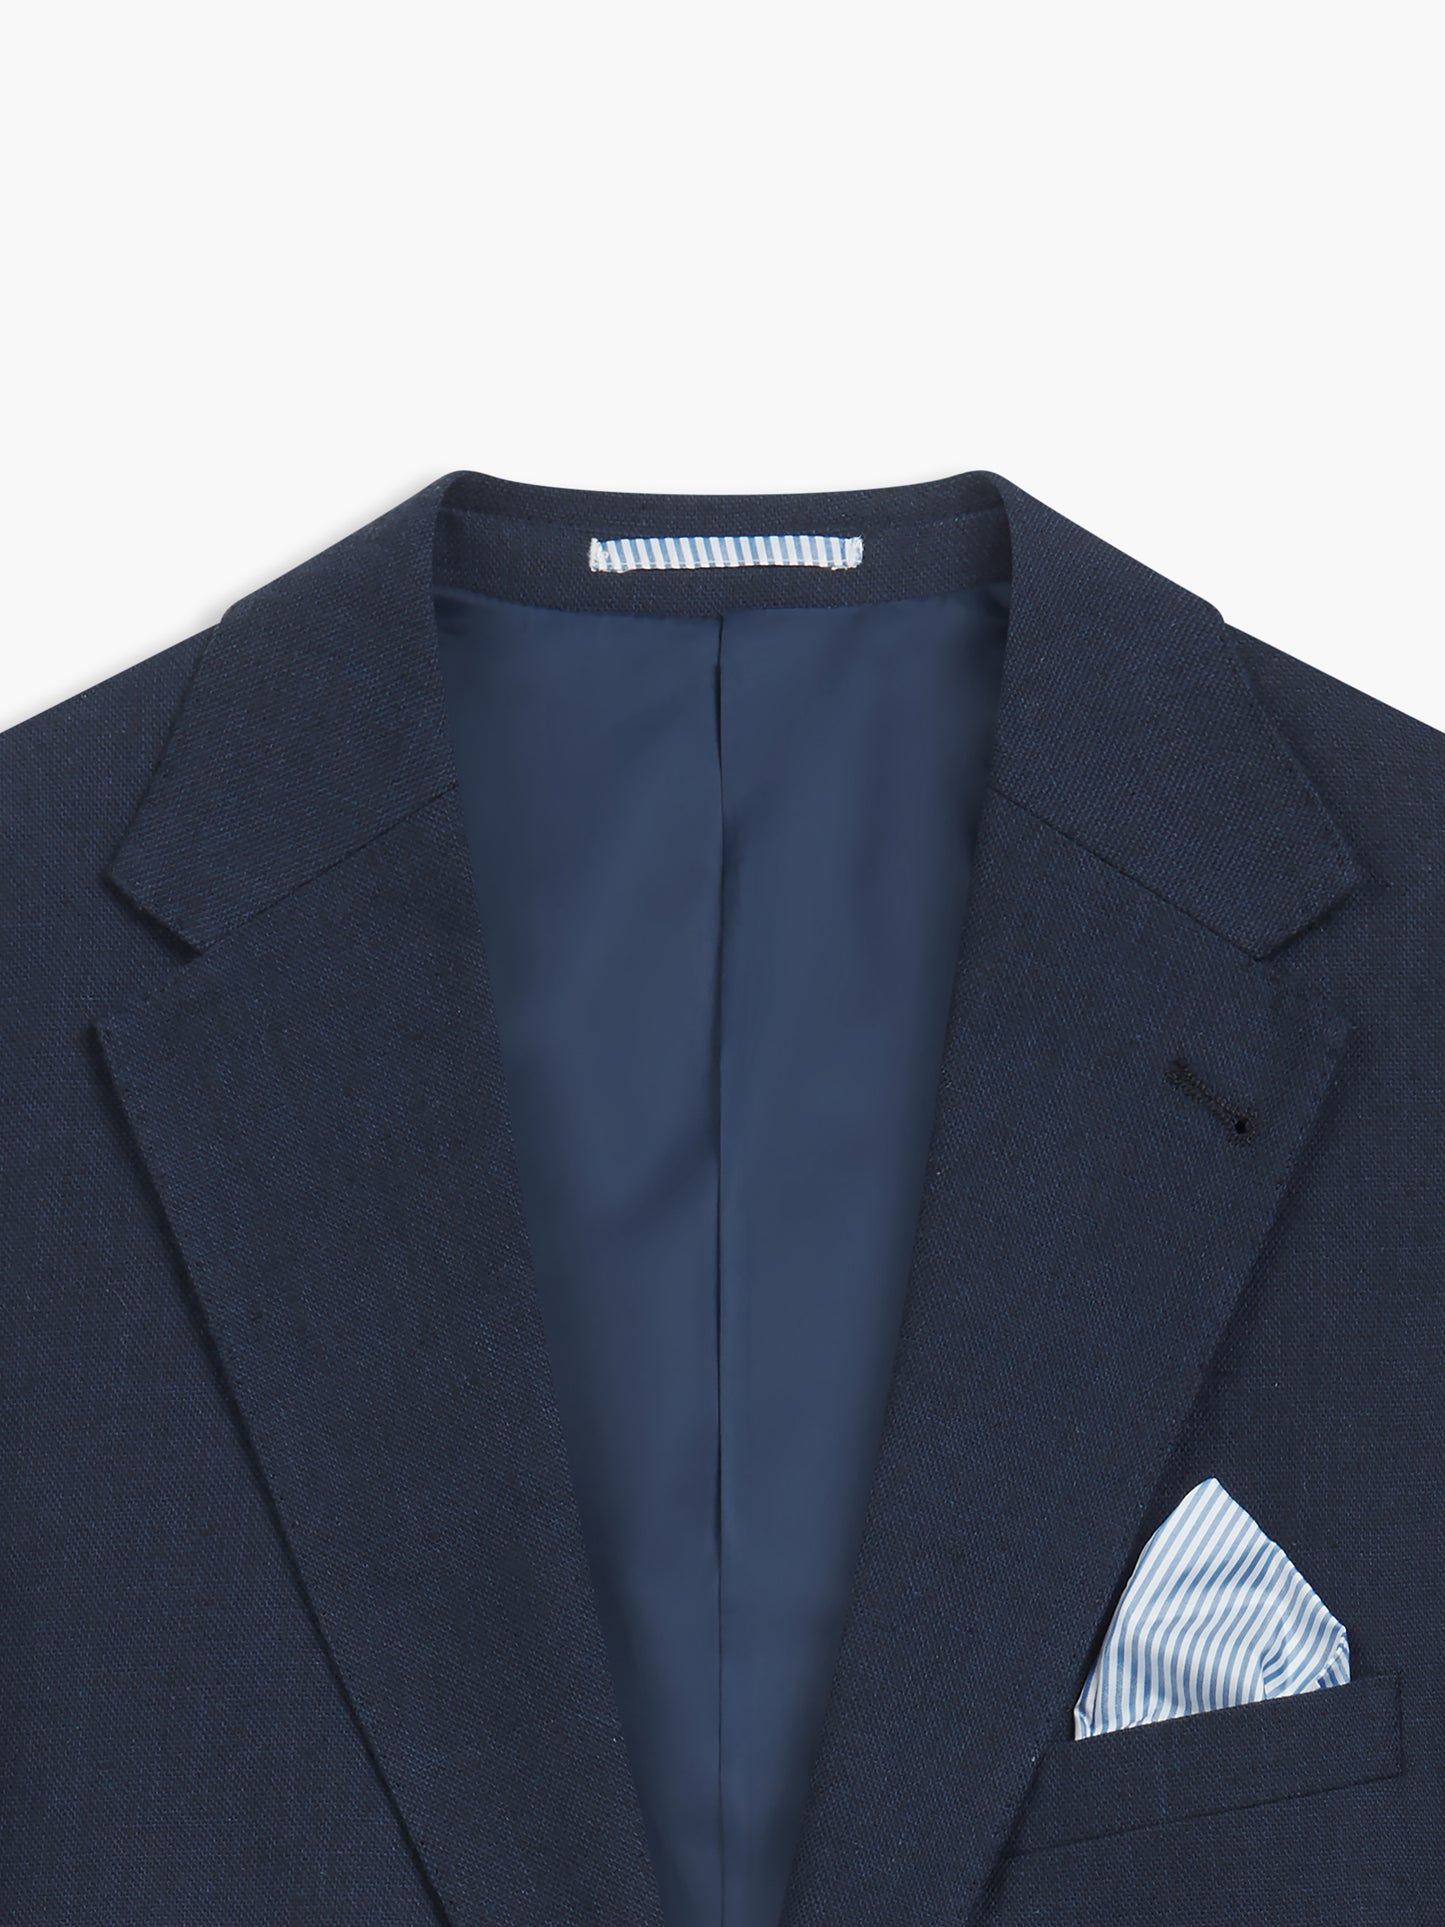 Image 8 of Slim Fit Single Breasted Linen Suit Jacket in Navy